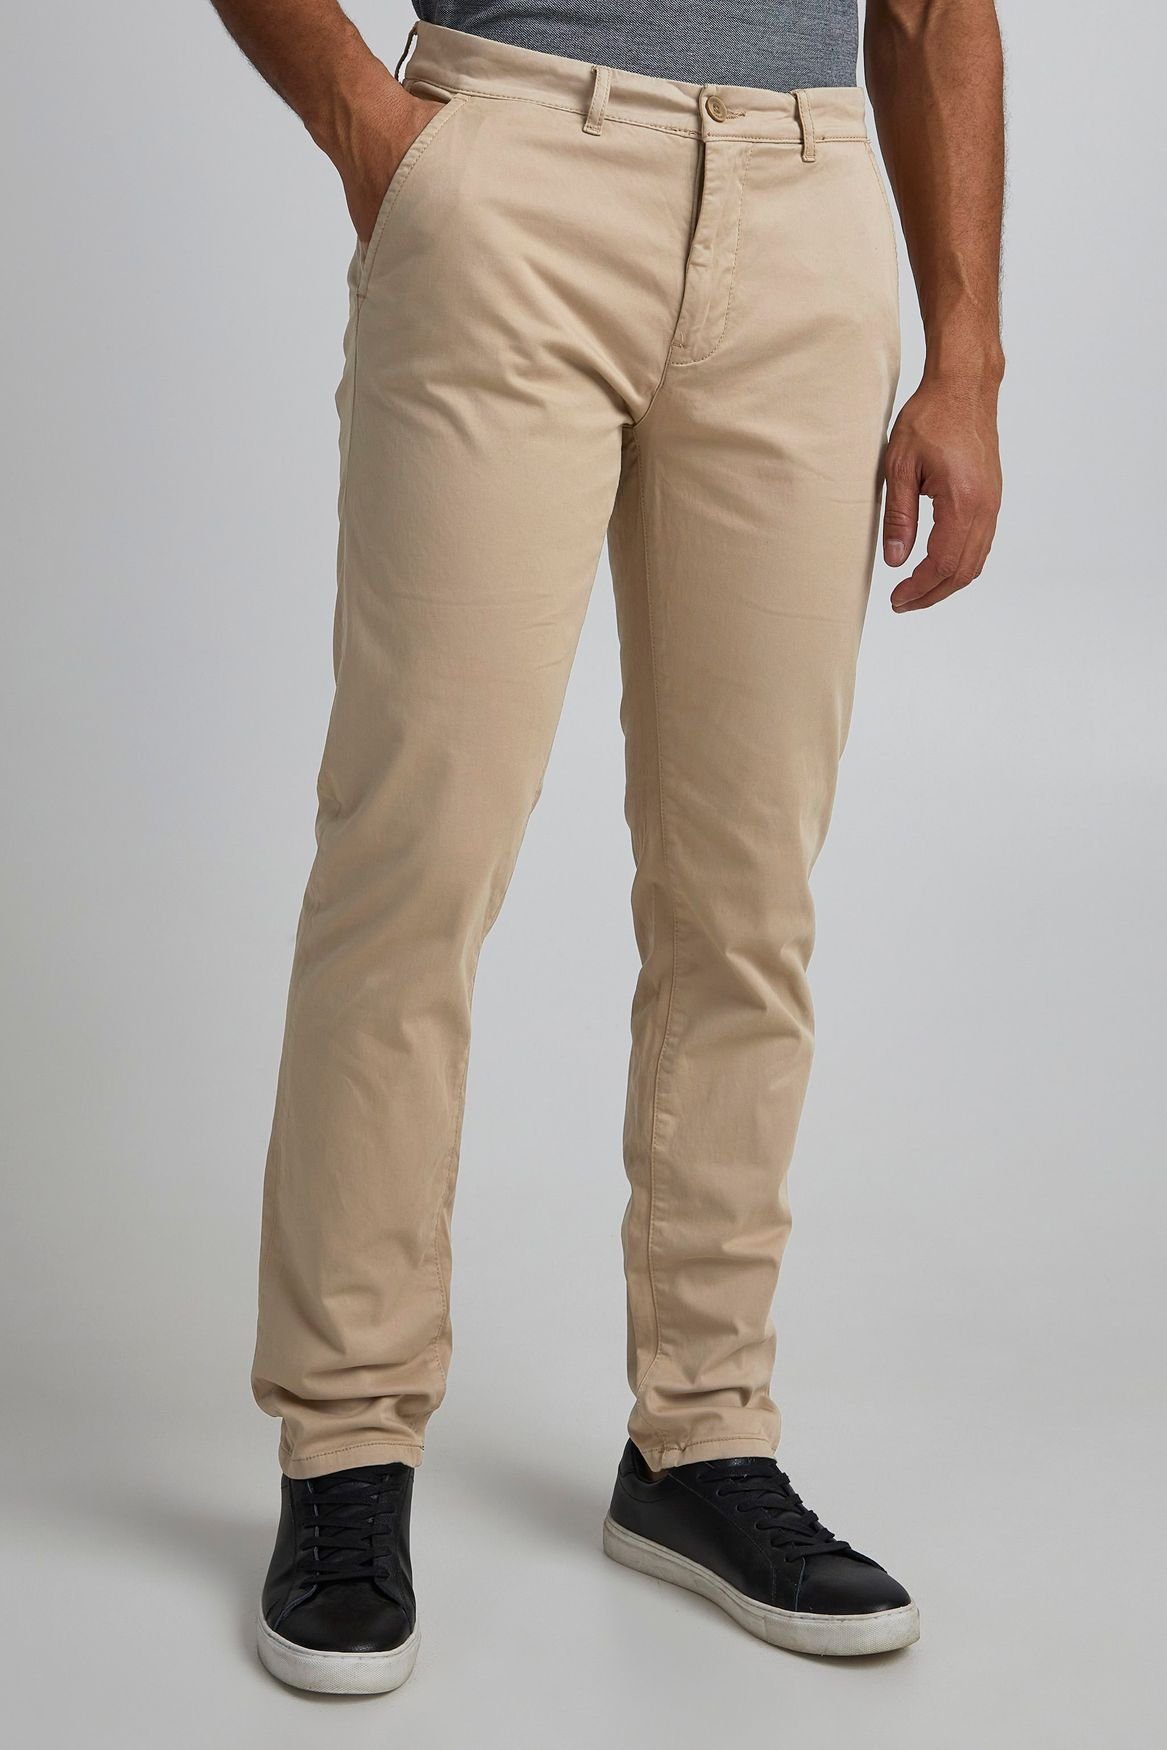 Casual Friday Chinohose Business Casual Chino Stoff Hose Slim Fit VIGGO 4239 in Beige